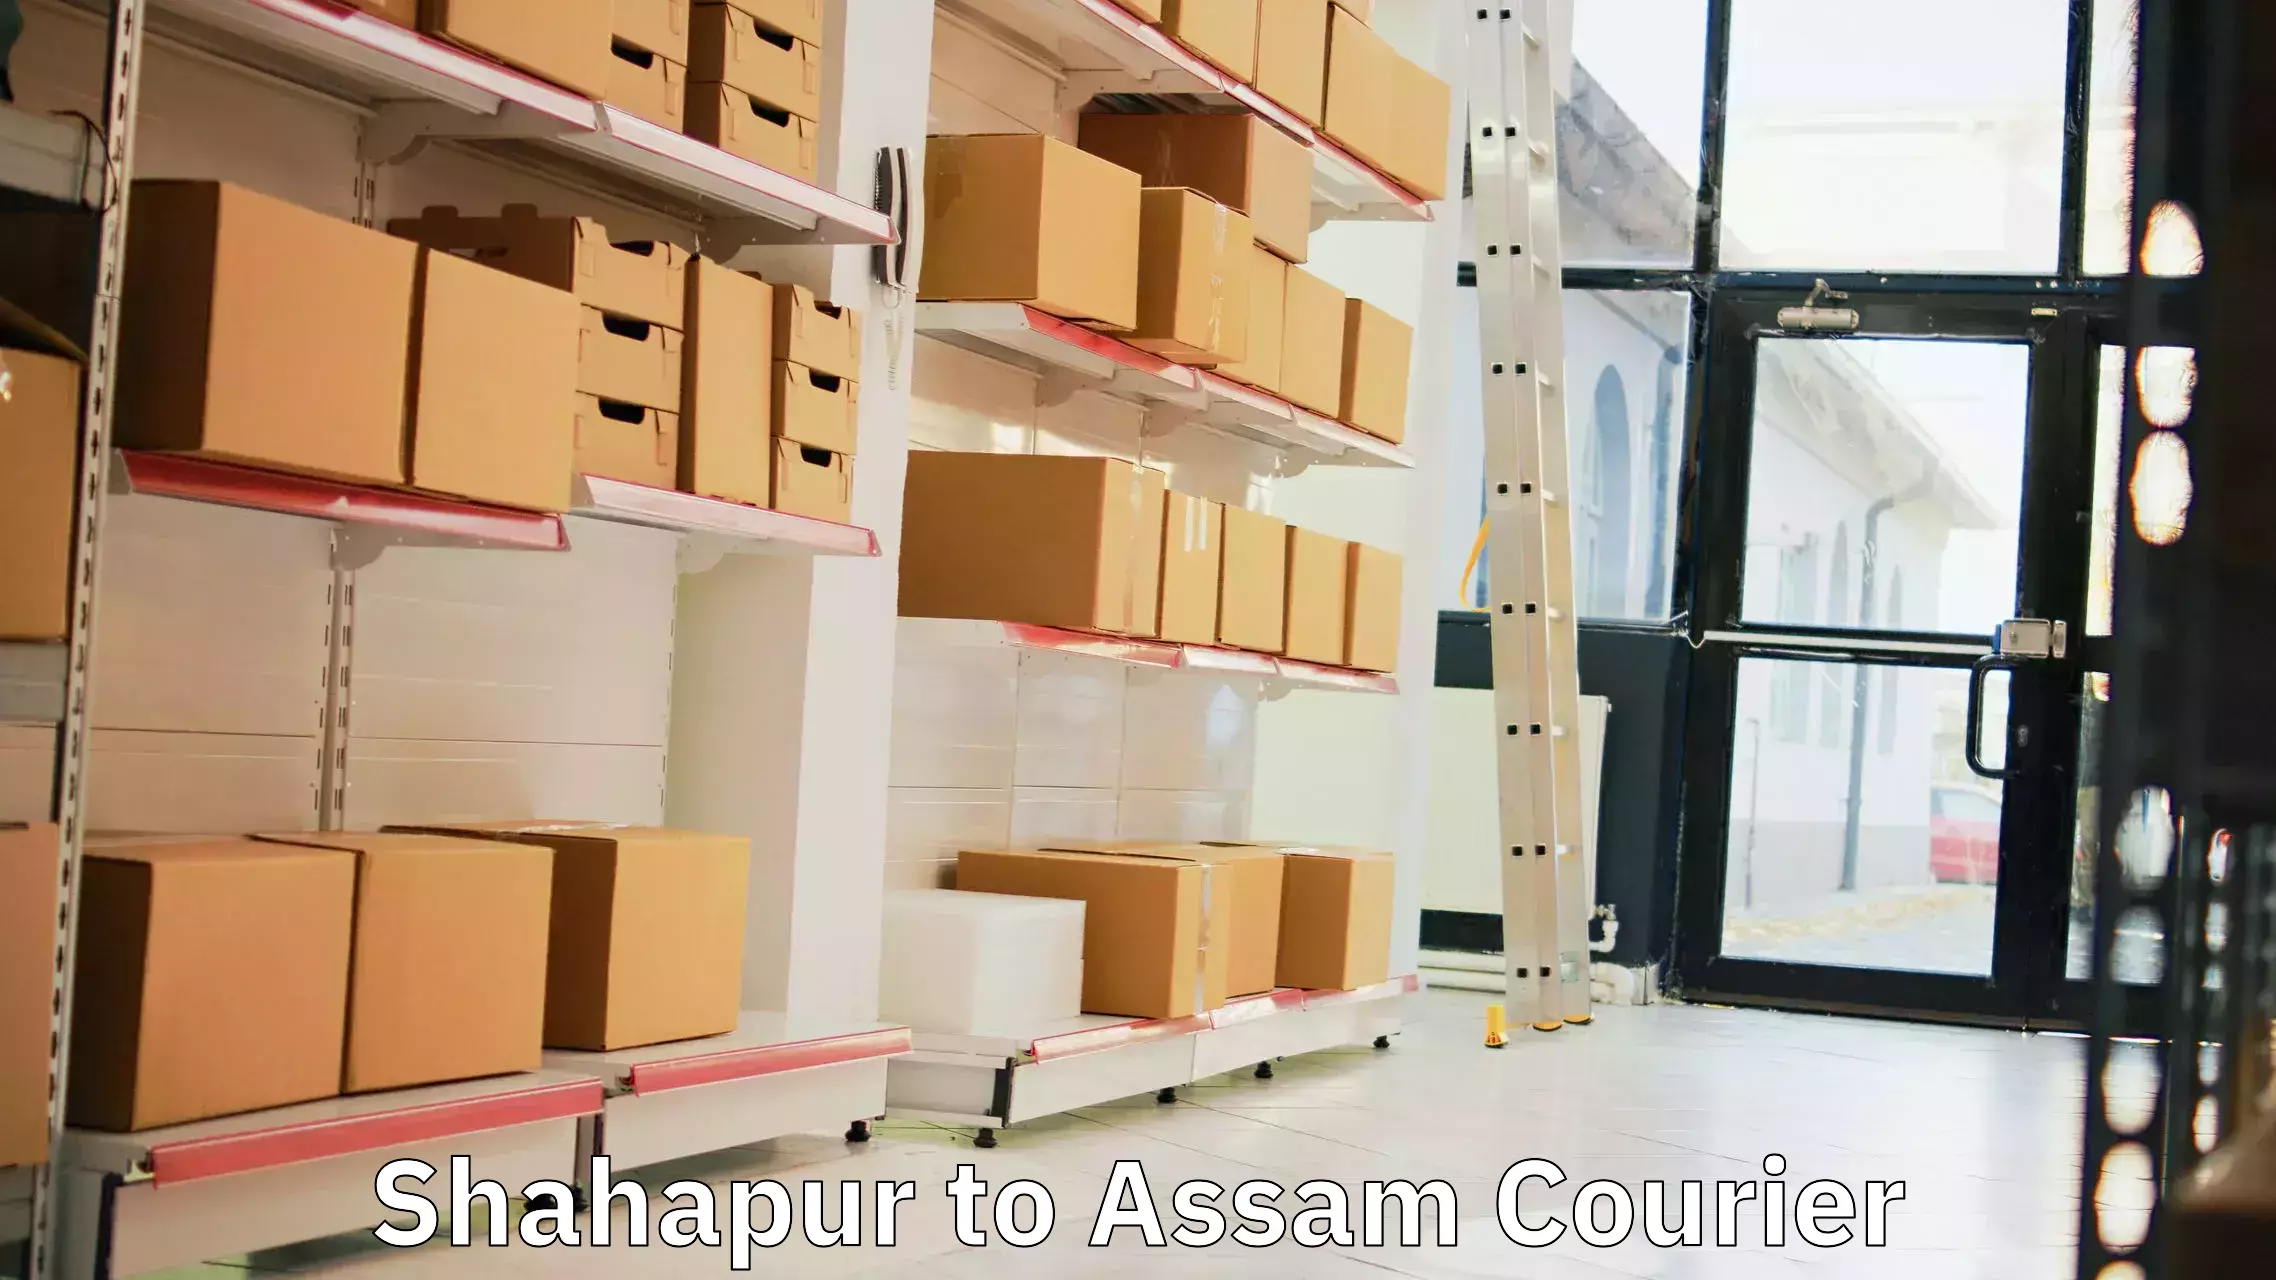 Courier service booking Shahapur to Tezpur University